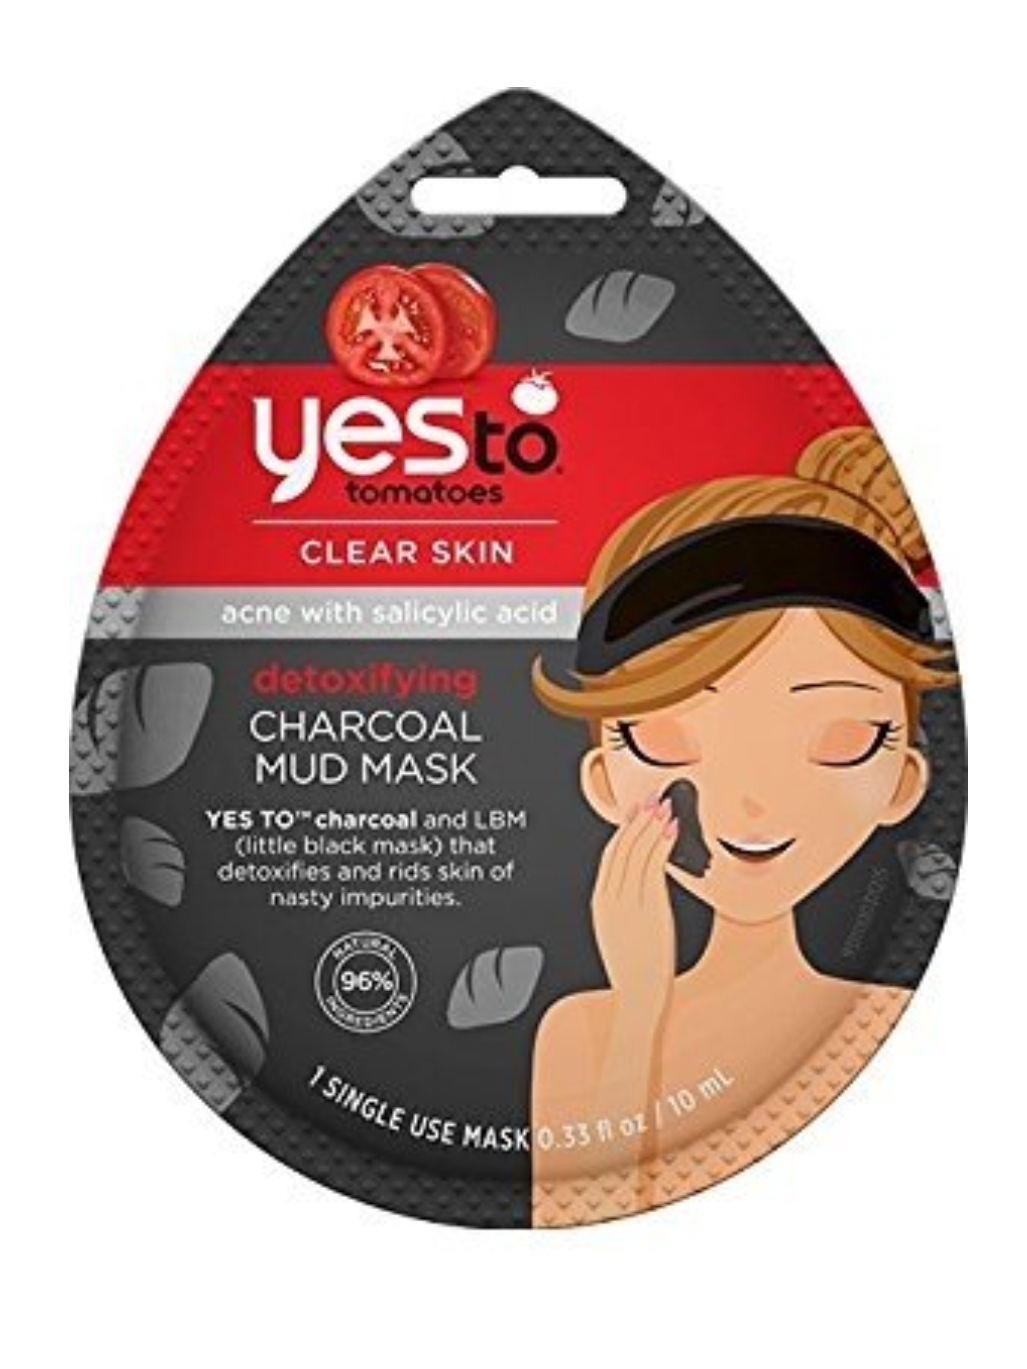 Yes to Tomatoes Charcoal Mud Mask, Single Use Face Mask  - $3.95